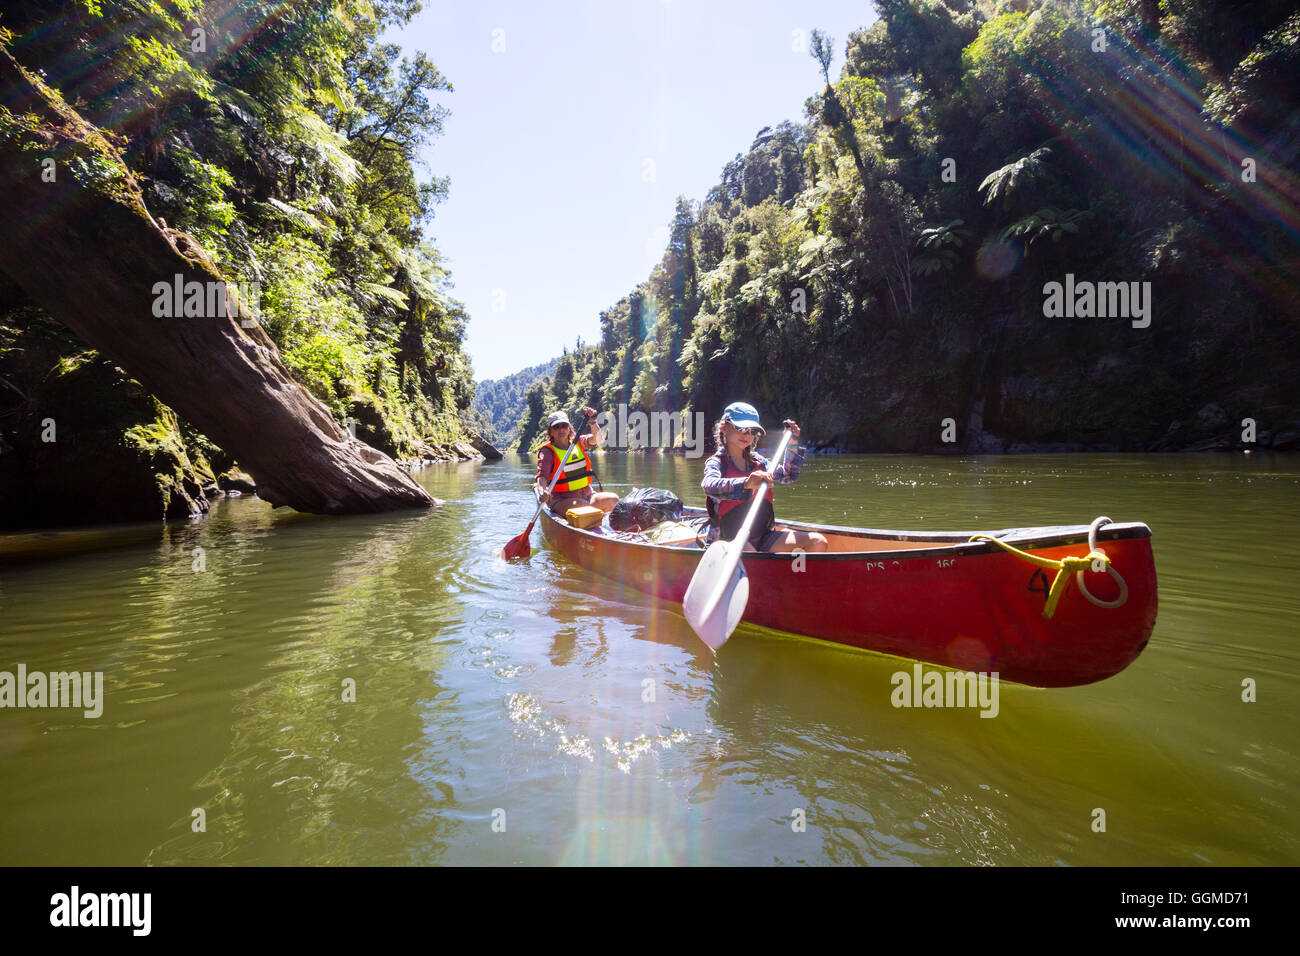 A girl and a woman on a canoe trip on the Whanganui River, North Island, New Zealand Stock Photo